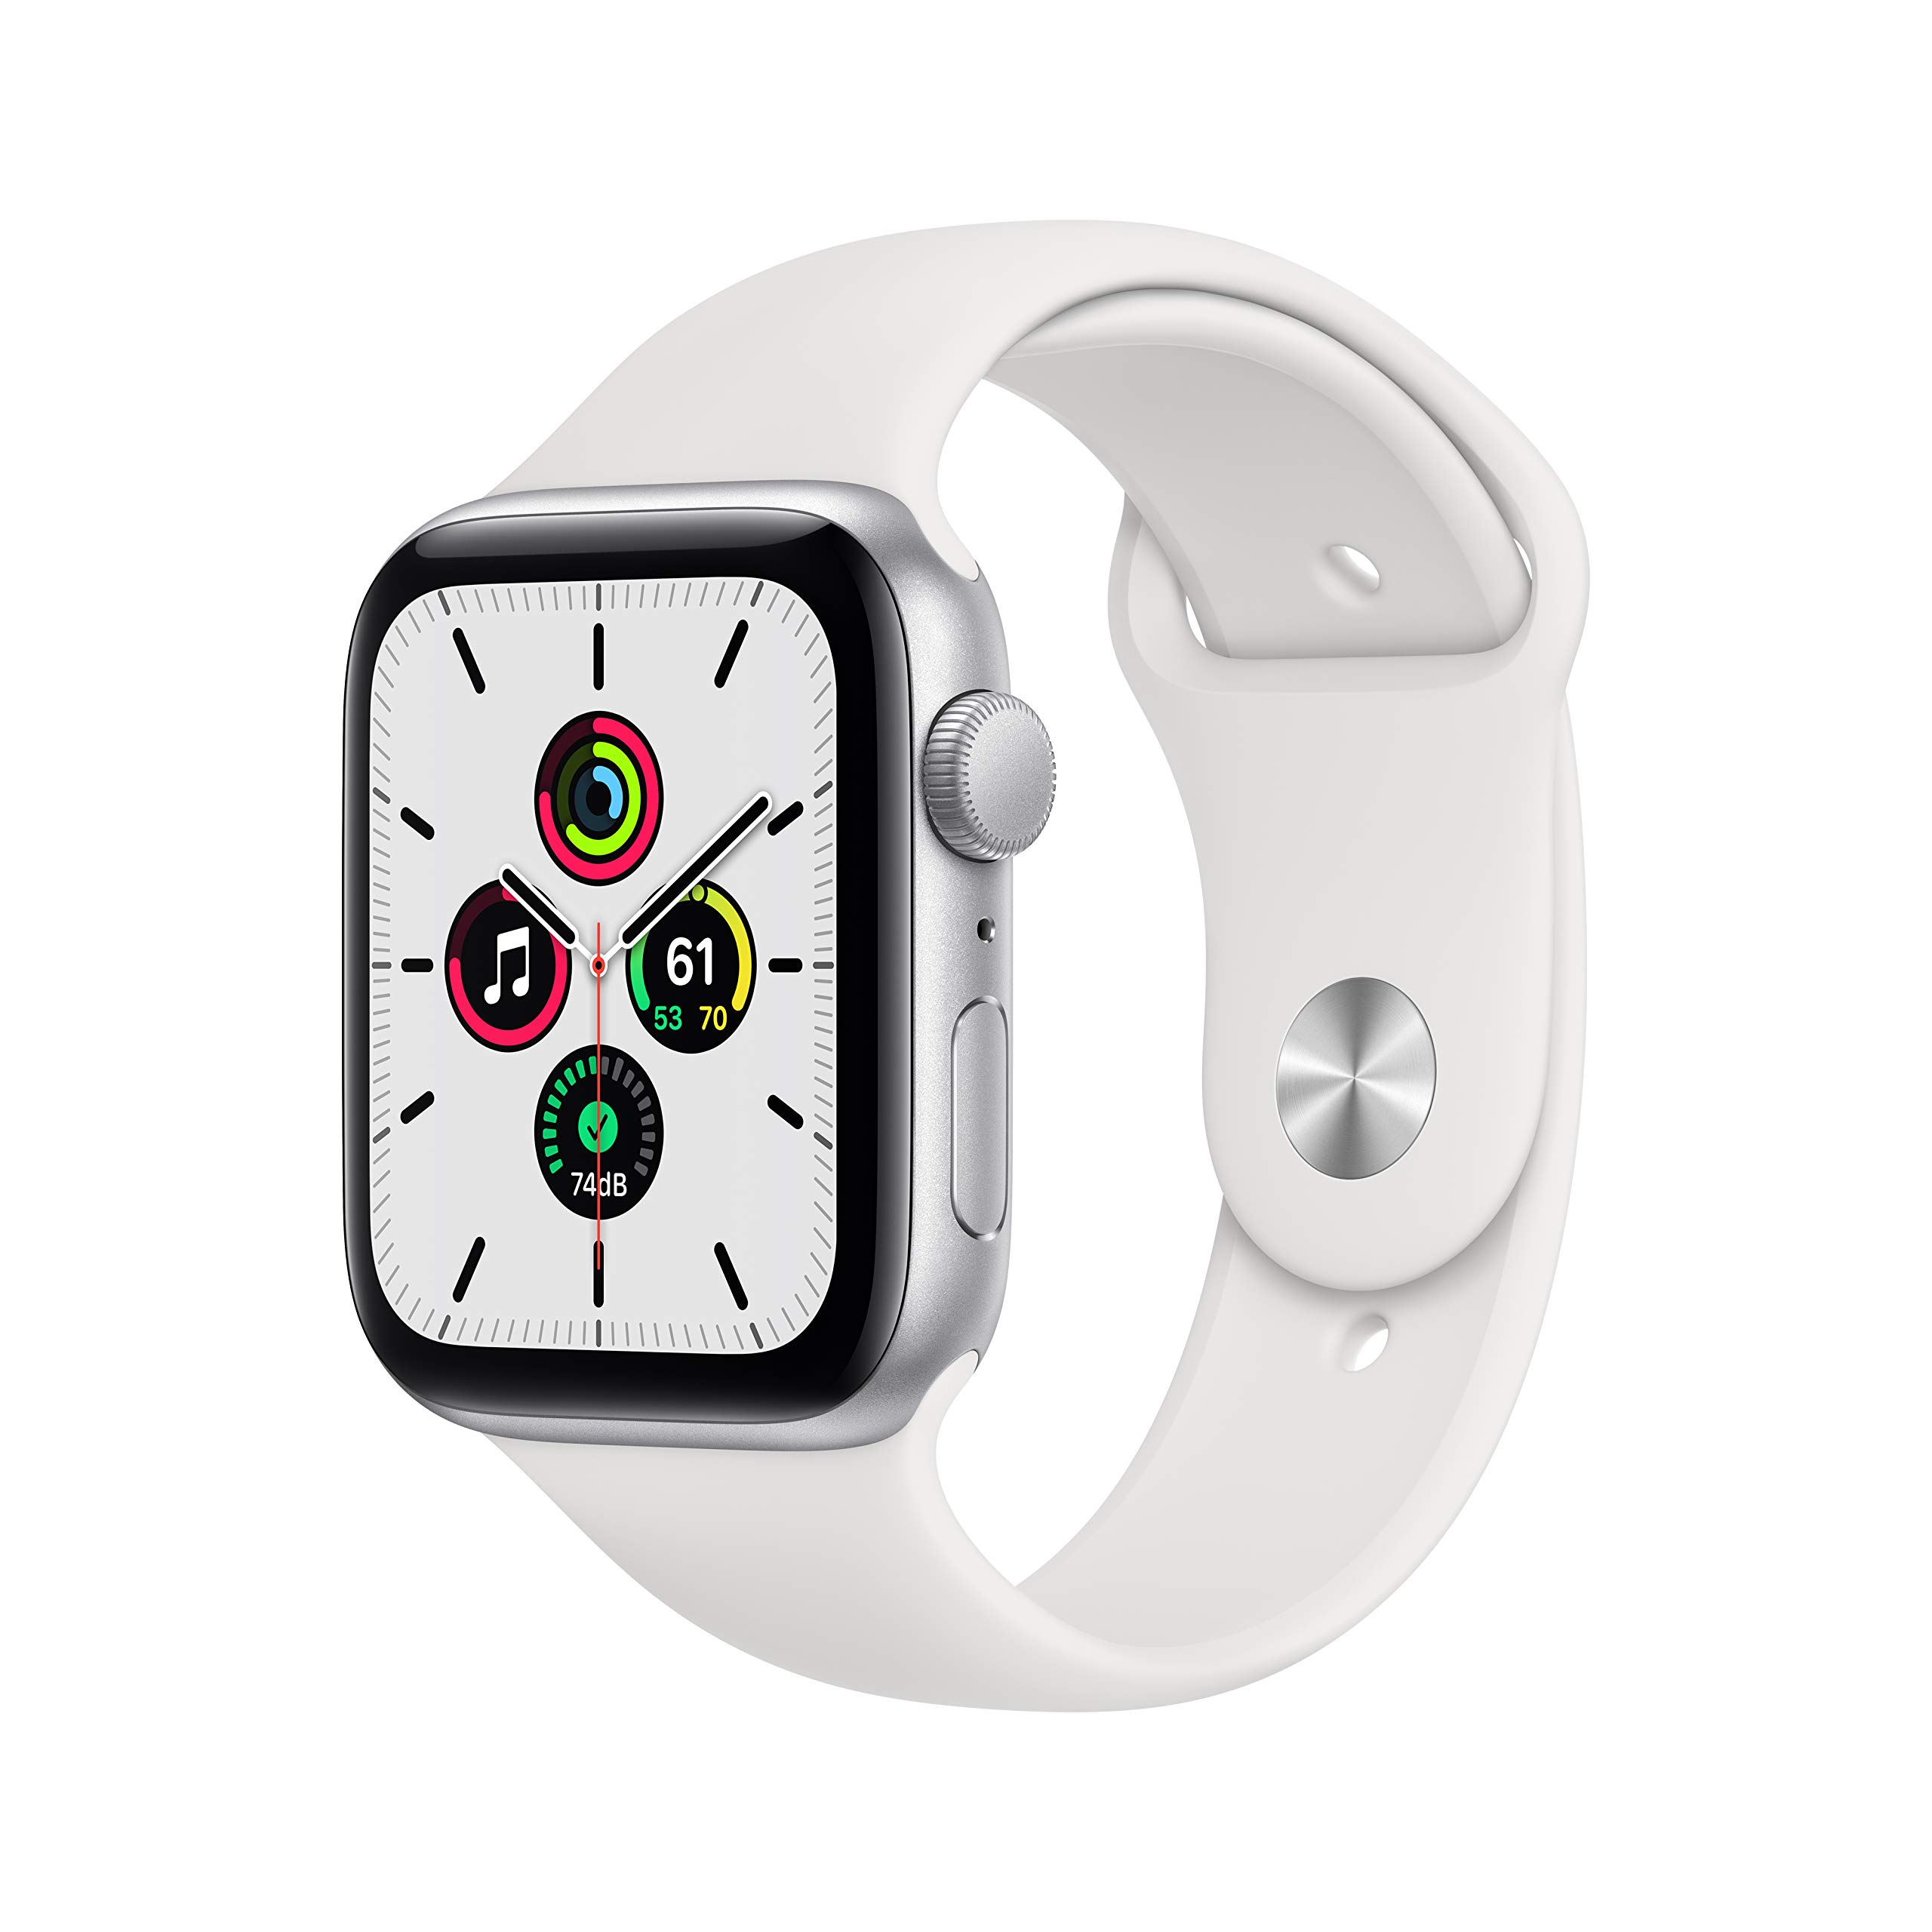 Apple Watch SE (GPS, 44mm) - Silver Aluminum Case with White Sport Band